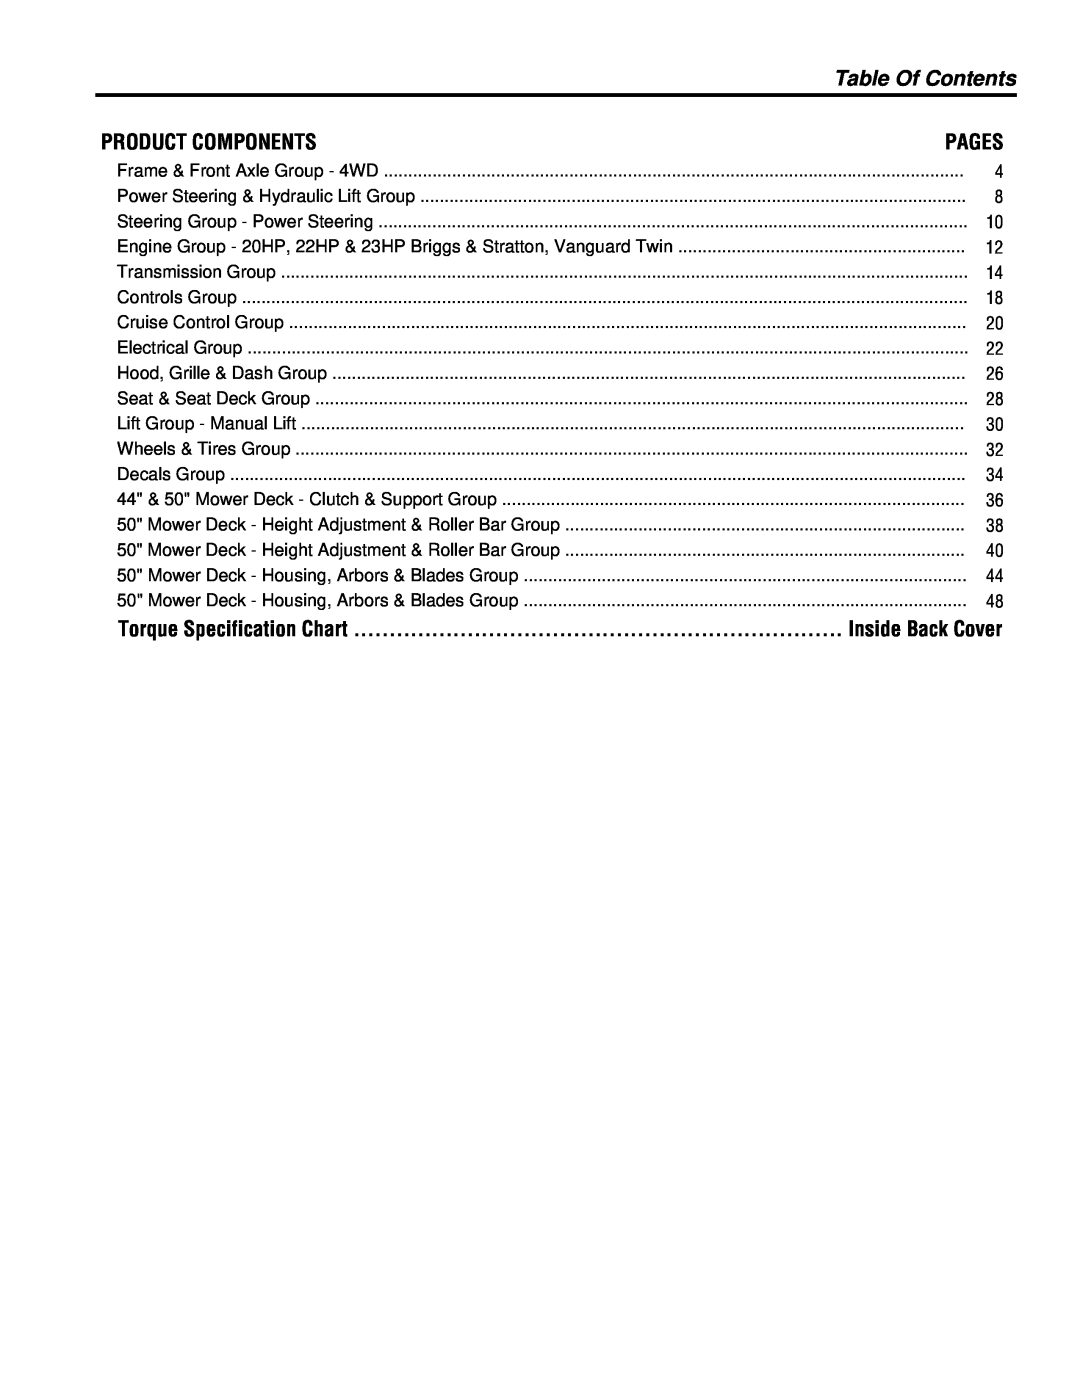 Simplicity 4WD Series manual Table Of Contents, Product Components, Pages, Torque Specification Chart, Inside Back Cover 